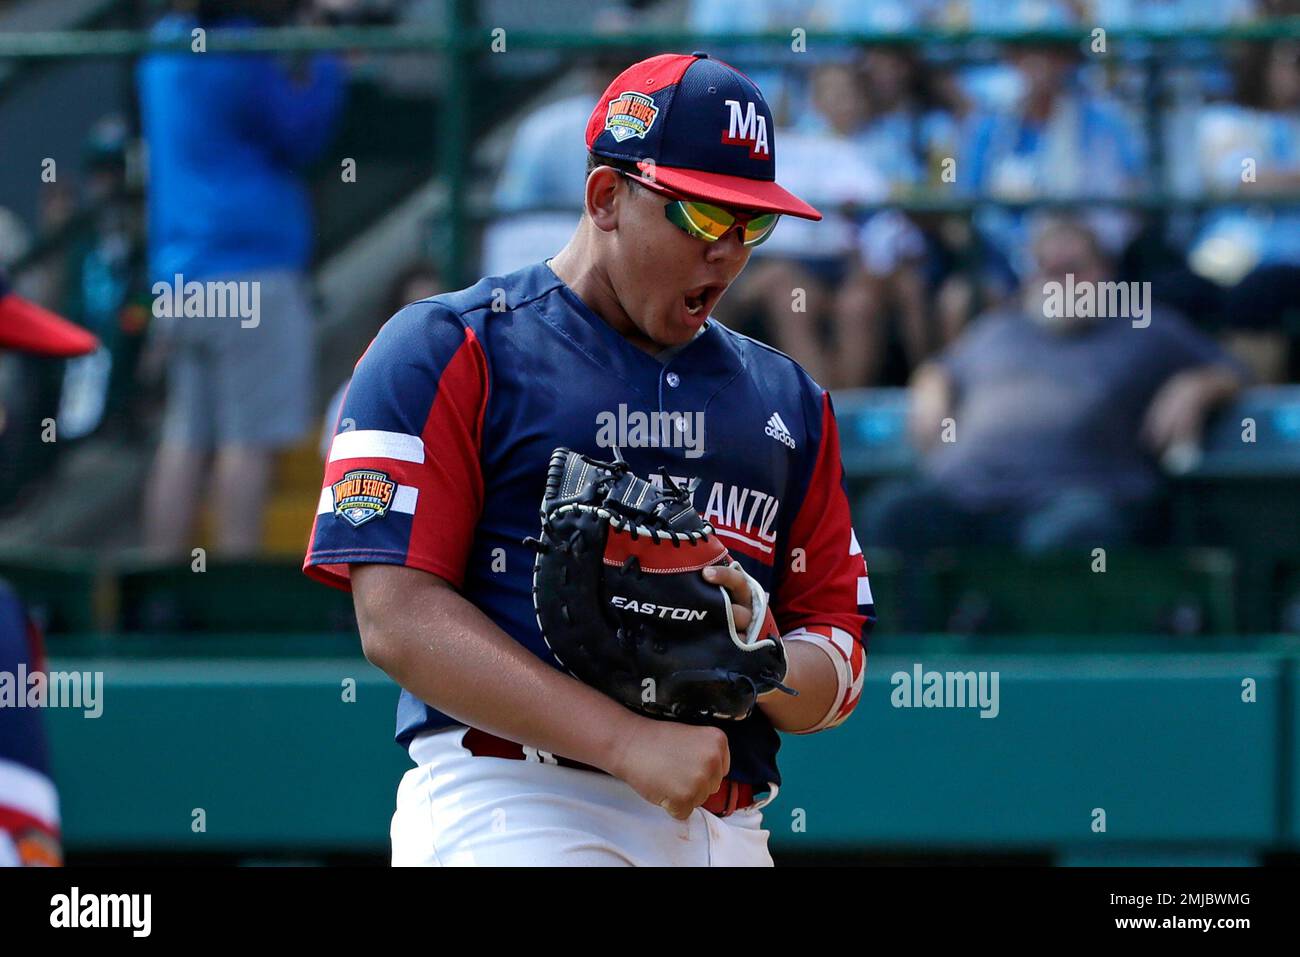 Elizabeth, New Jersey's Yadi Mateo celebrates getting the final out of the  second inning of a baseball game against Wailuku, Hawaii at the Little  League World Series tournament in South Williamsport, Pa.